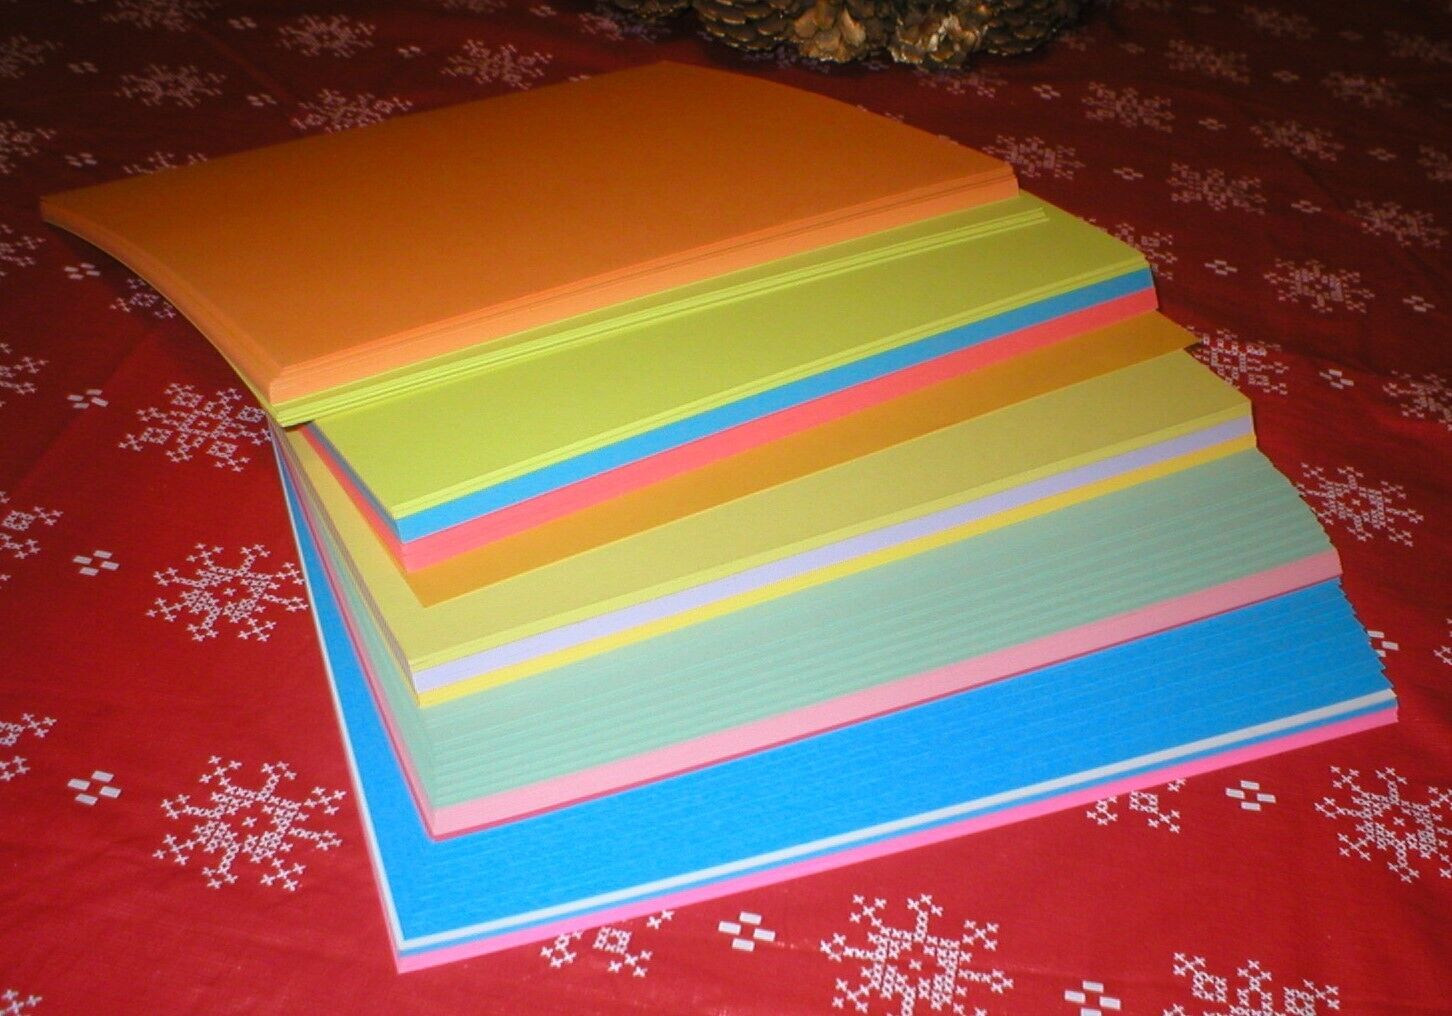 MULTI-COLORED HEAVY DUTY PAPER 8.5 X 11 LOOSE SHEETS SOLD AS IS